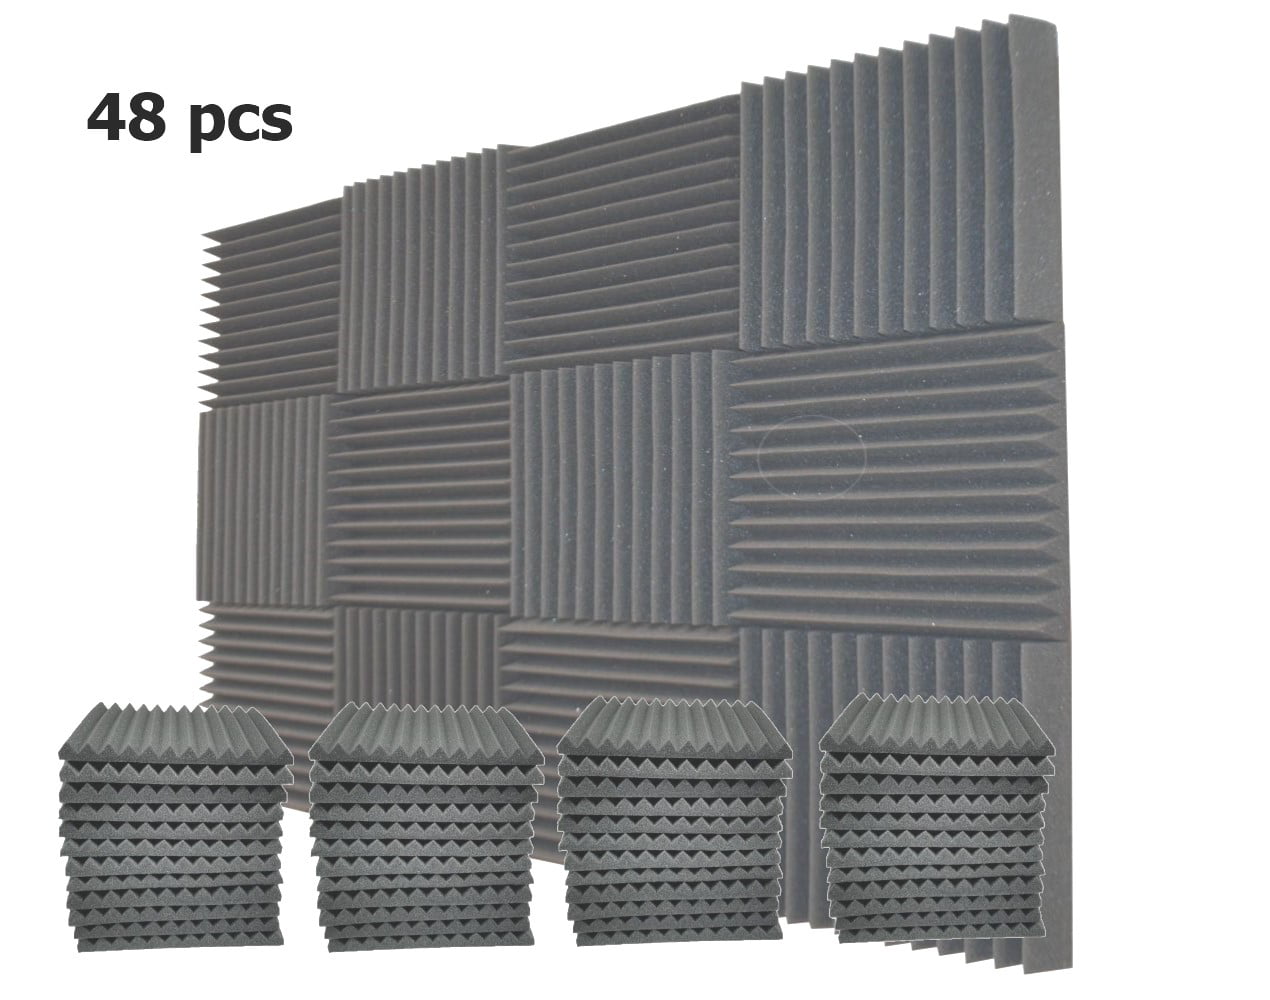 New 5 Pack Acoustic Sound Isolation Wall Panels Studio Proofing Decor Foam